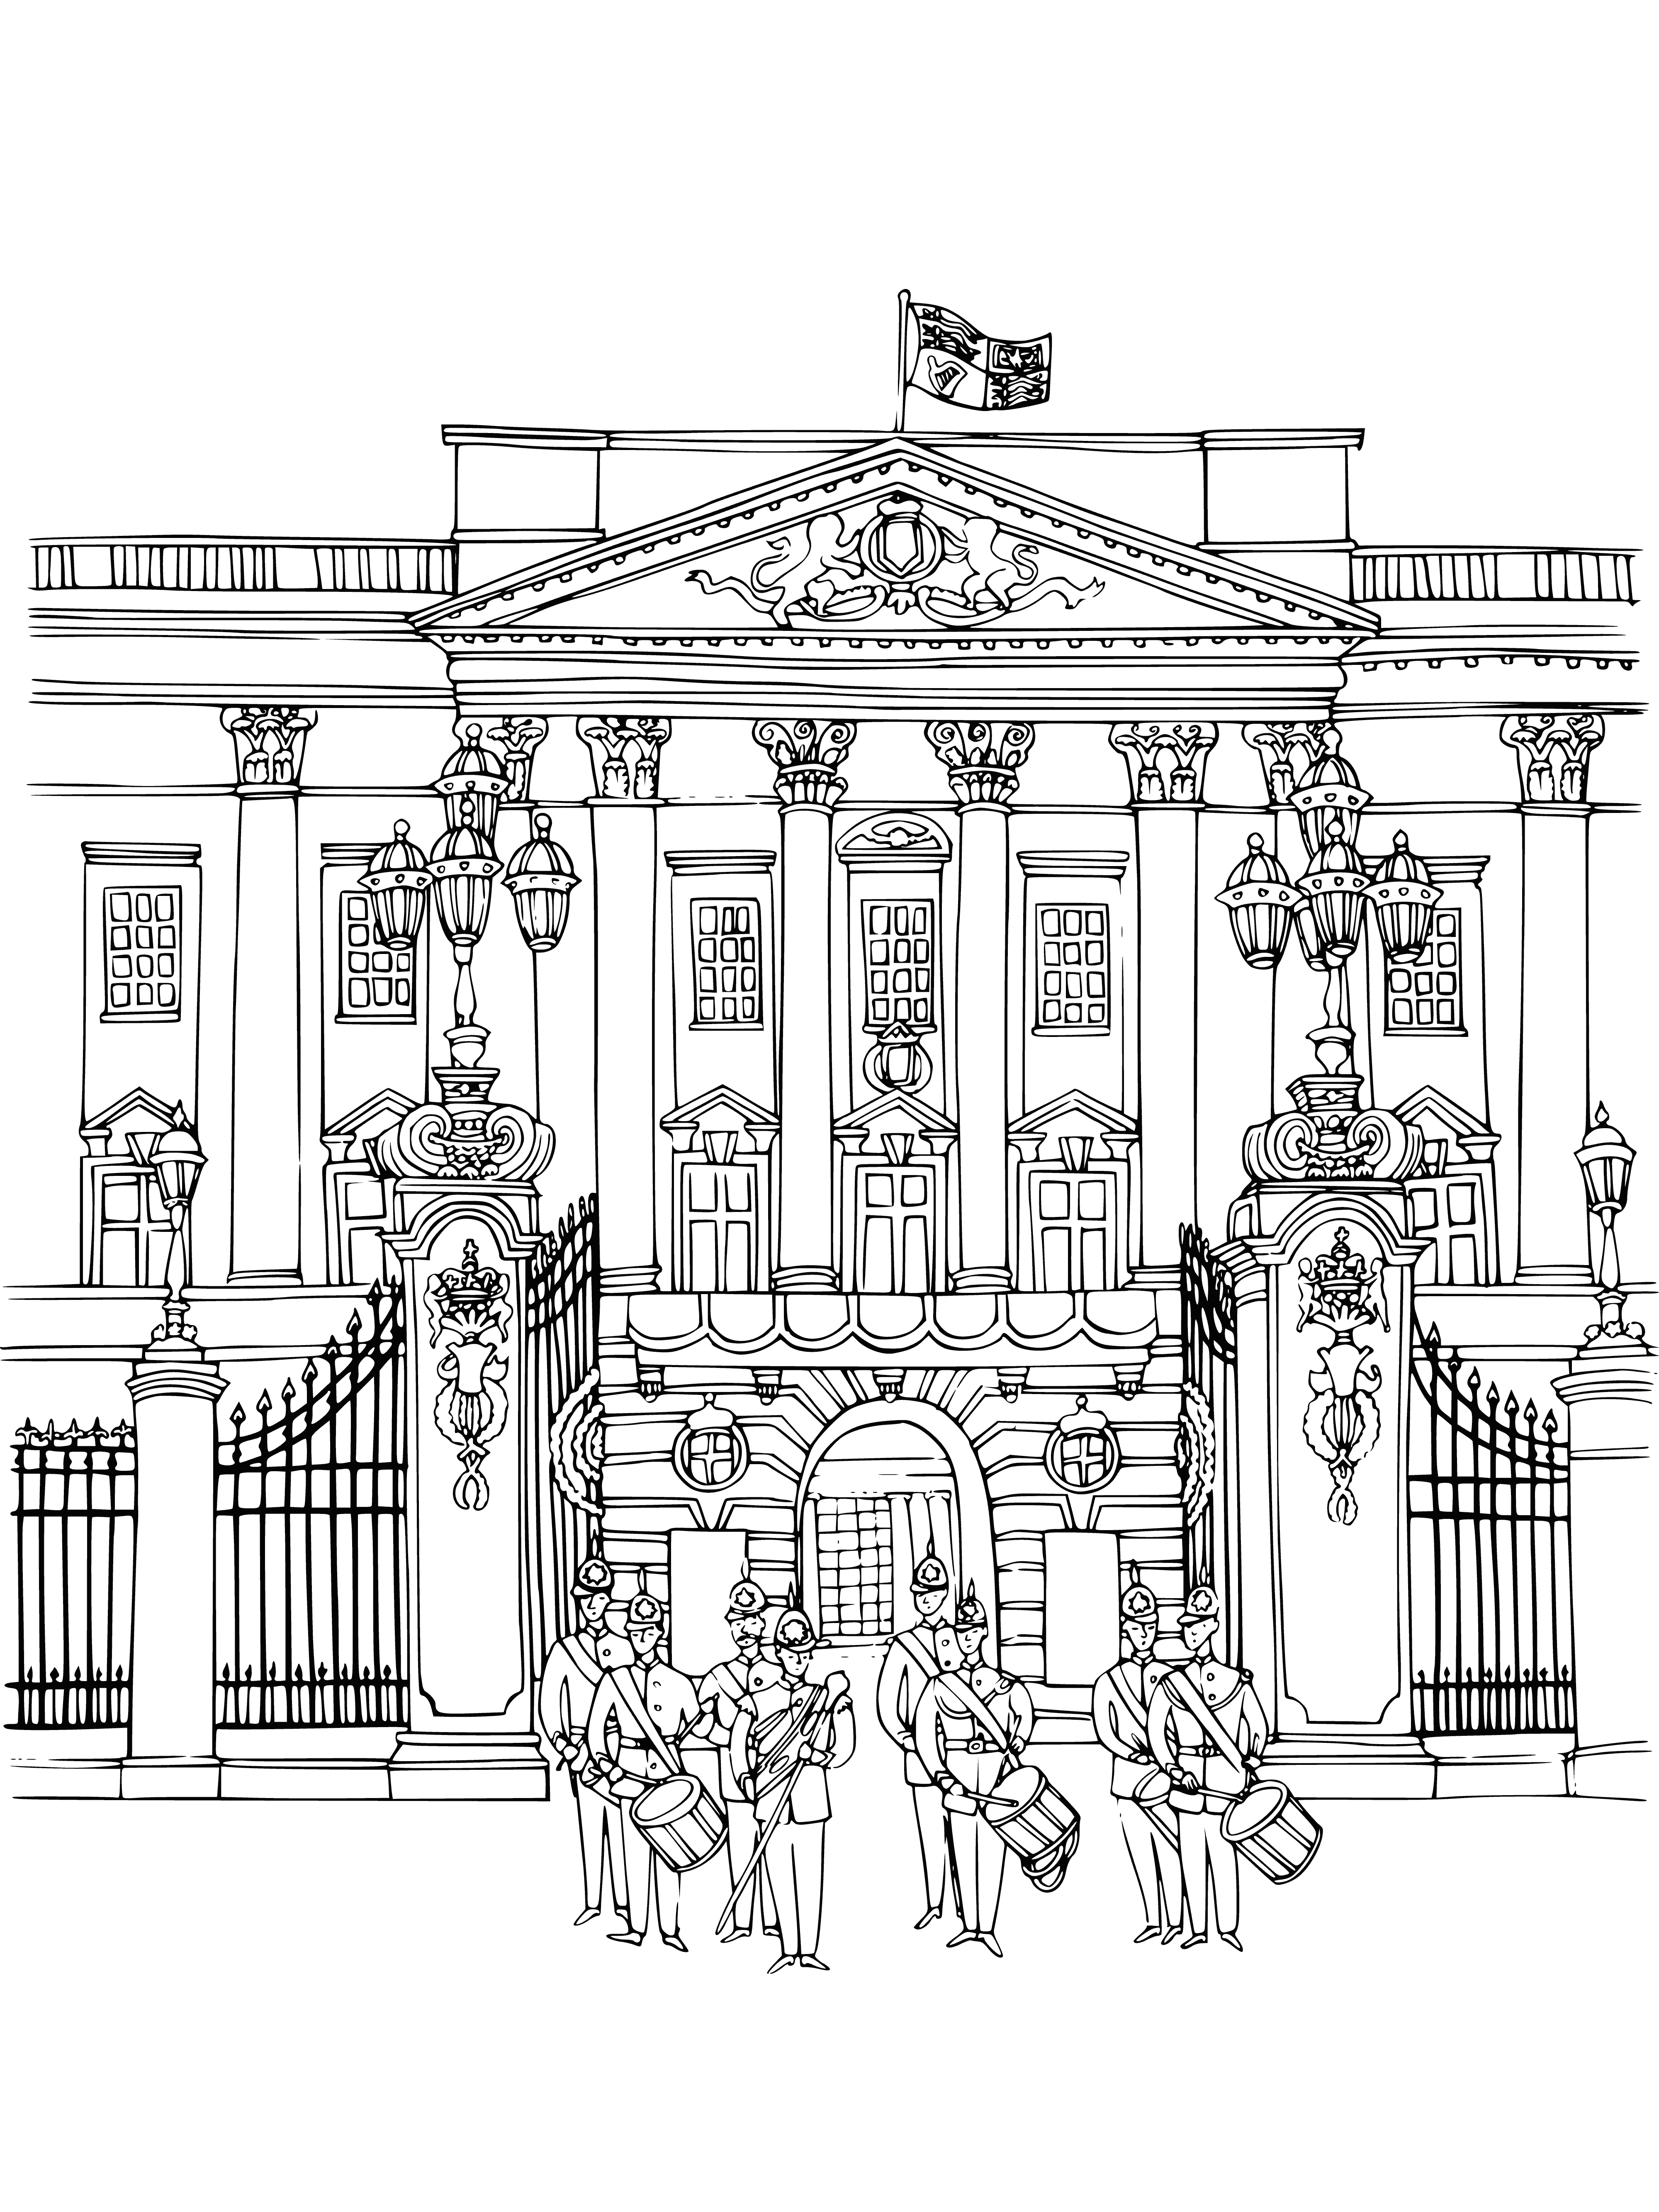 coloring page: Buckingham Palace in London, England: Ornate building, many towers, flags, fence, trees, people walking/cars parked.